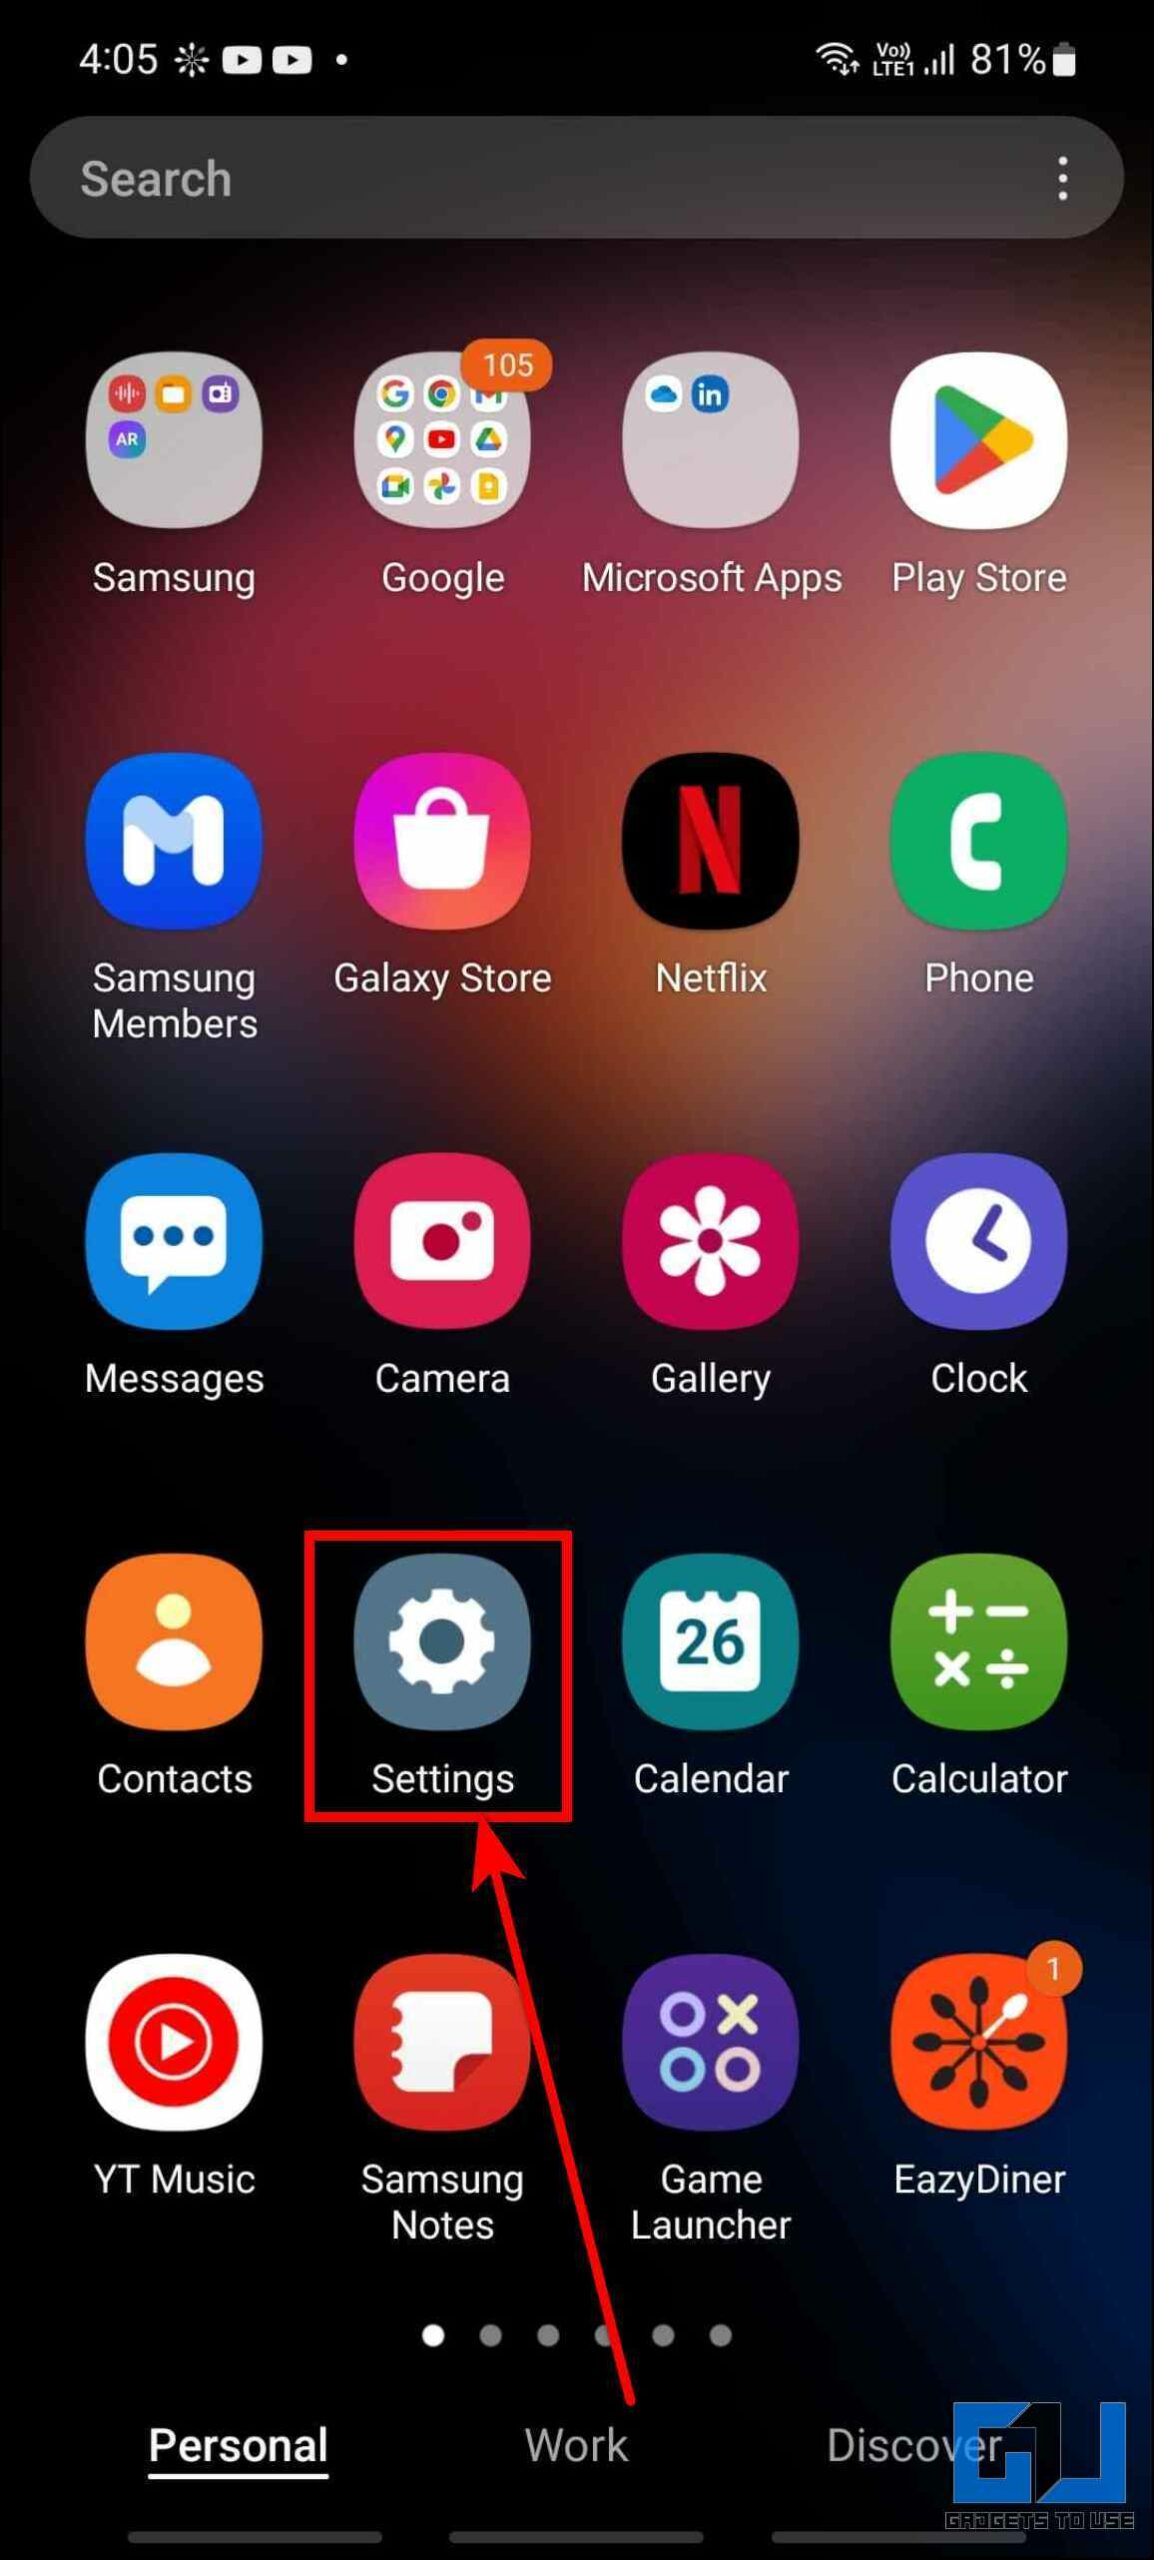 Disable Discover Tab on Samsung Phone